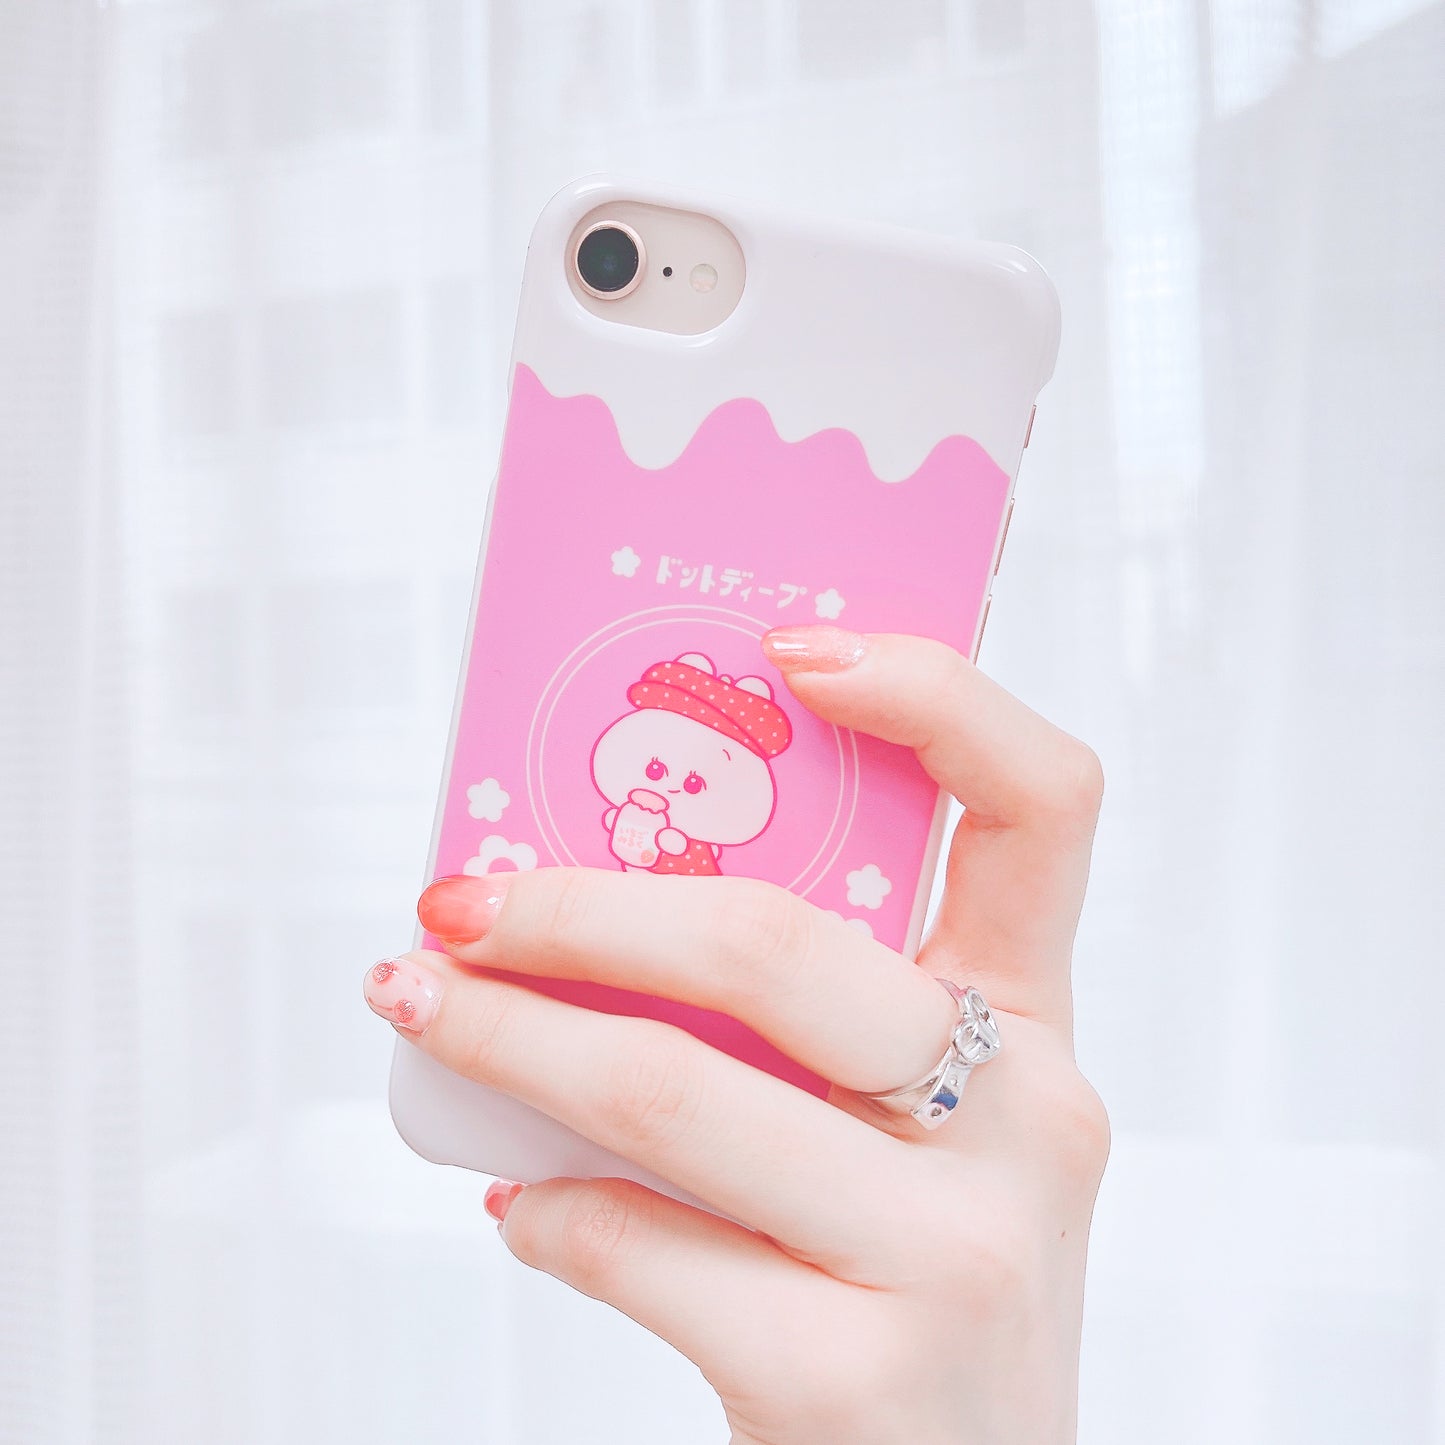 [Asamimi-chan] Smartphone case compatible with almost all models (Ichigo Milk) softbank series [Made to order]